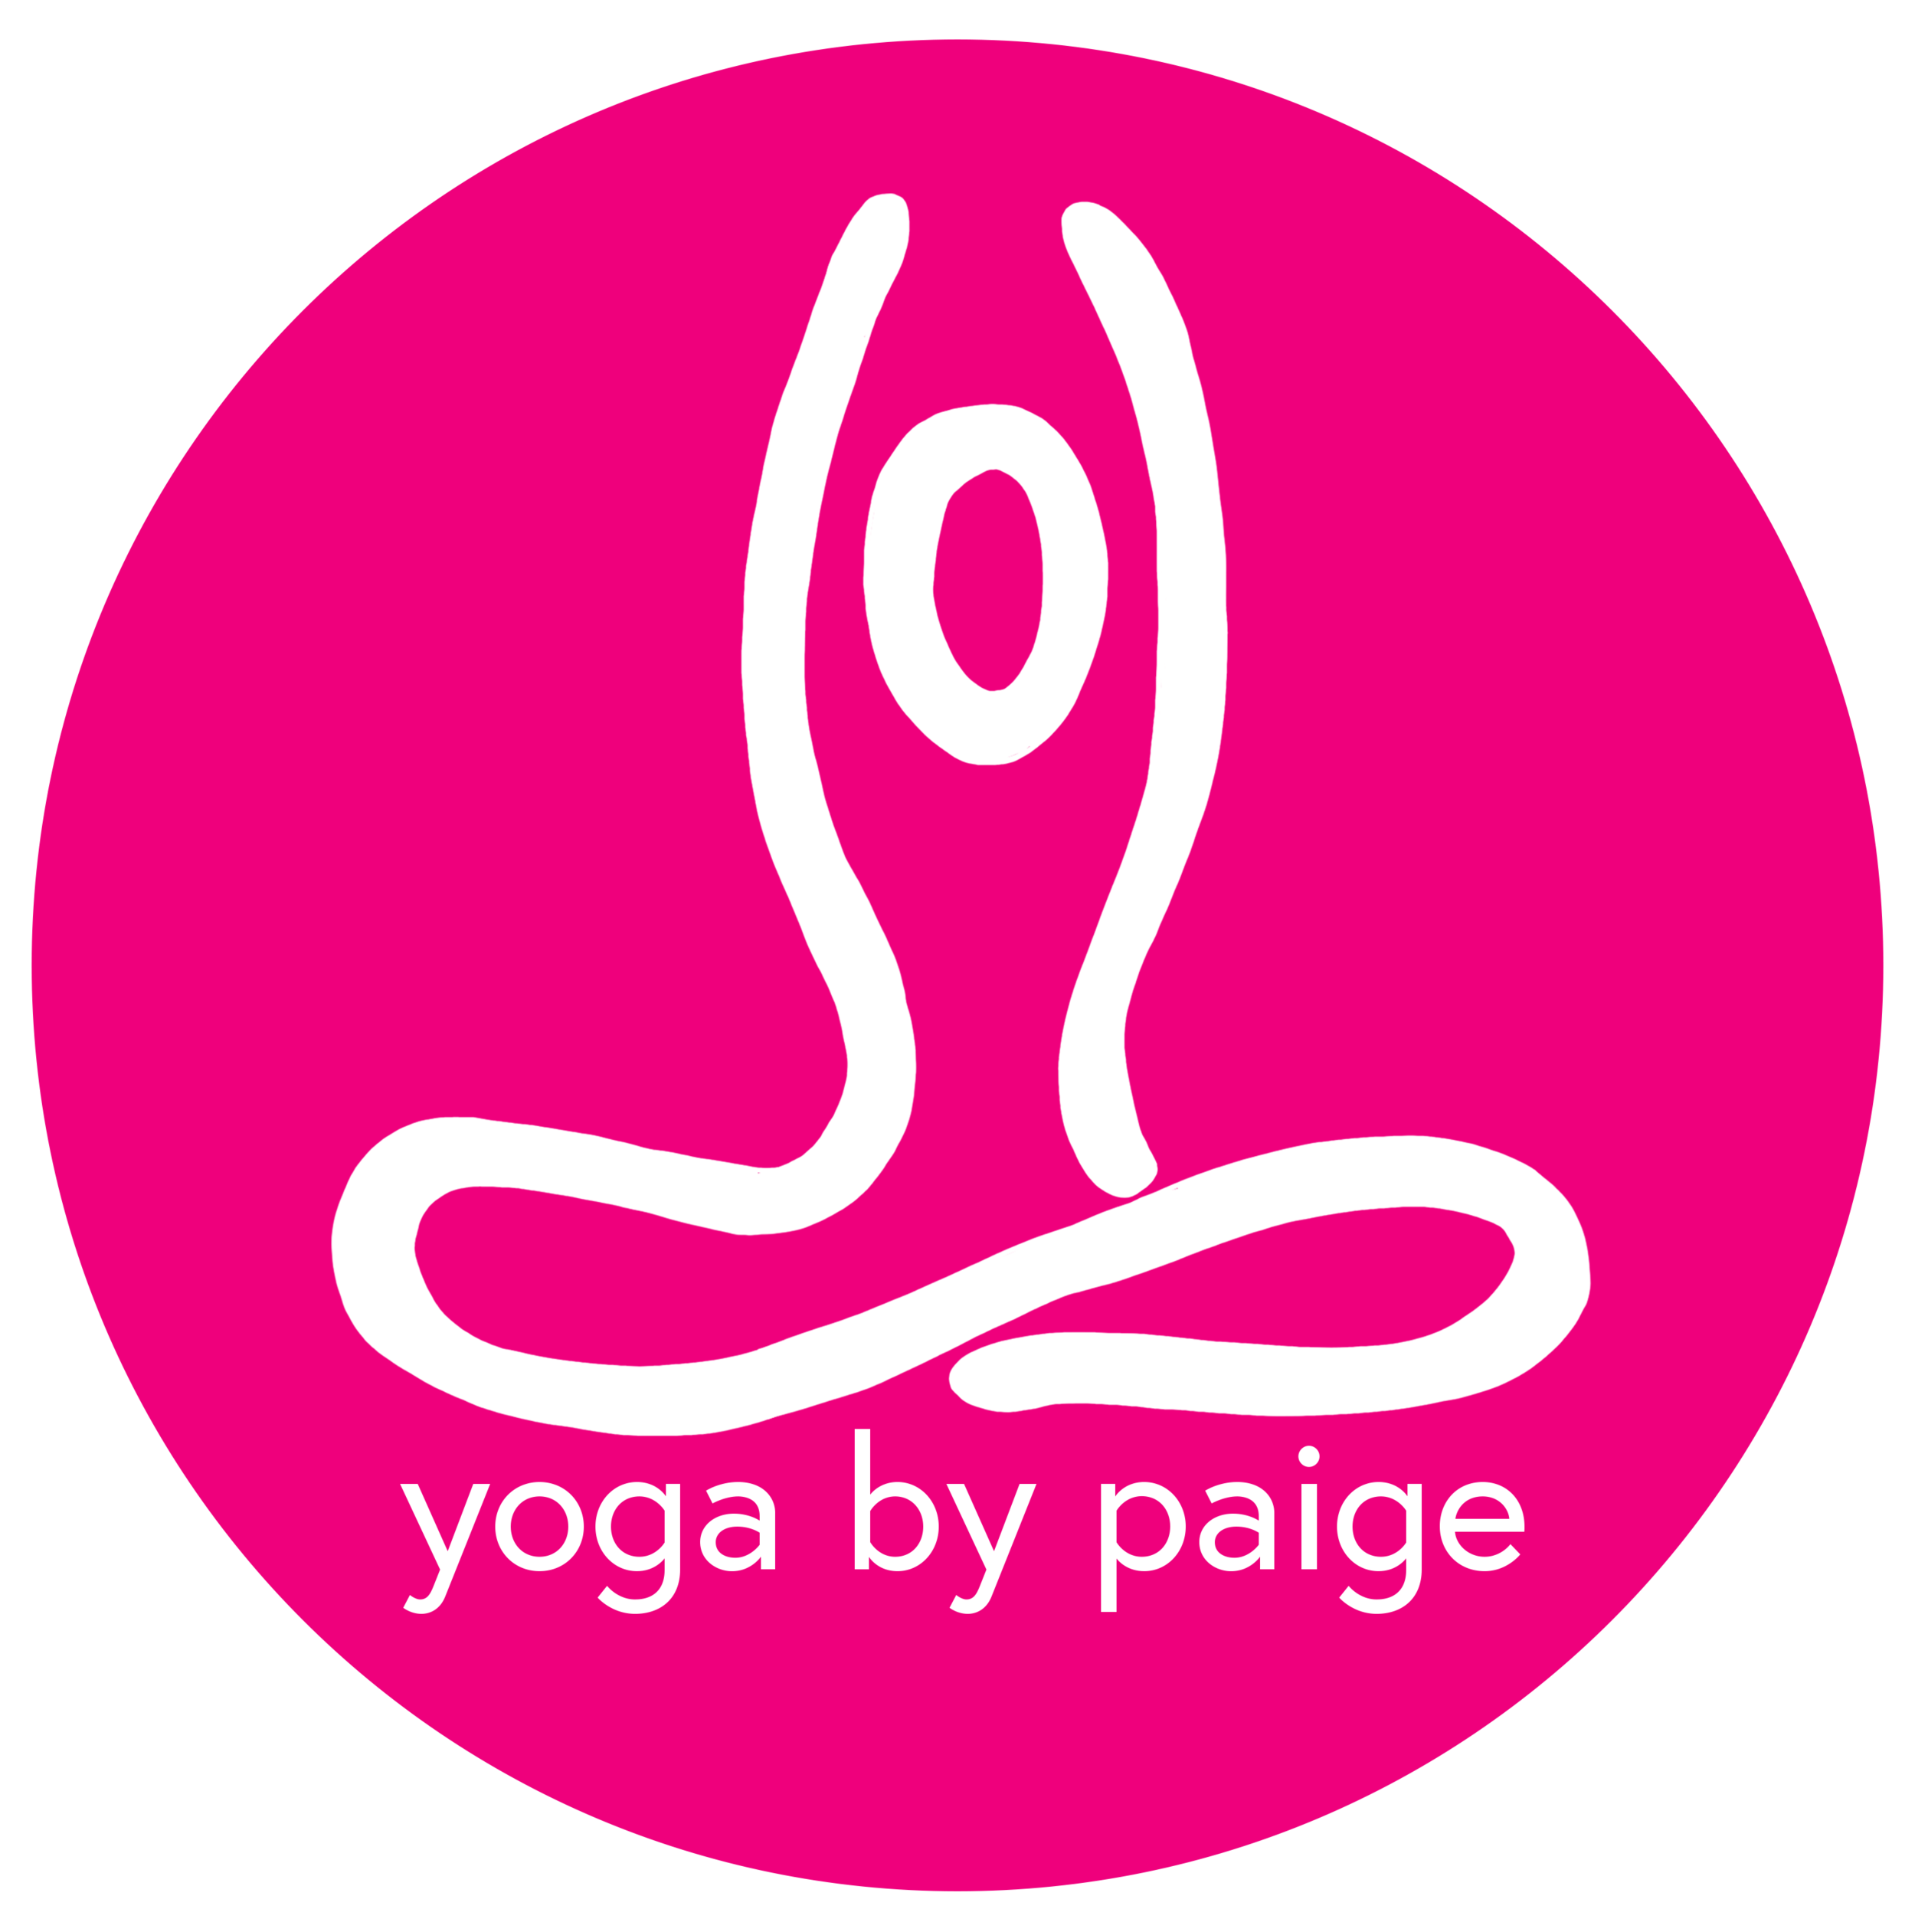 Schedule — Yoga by Paige